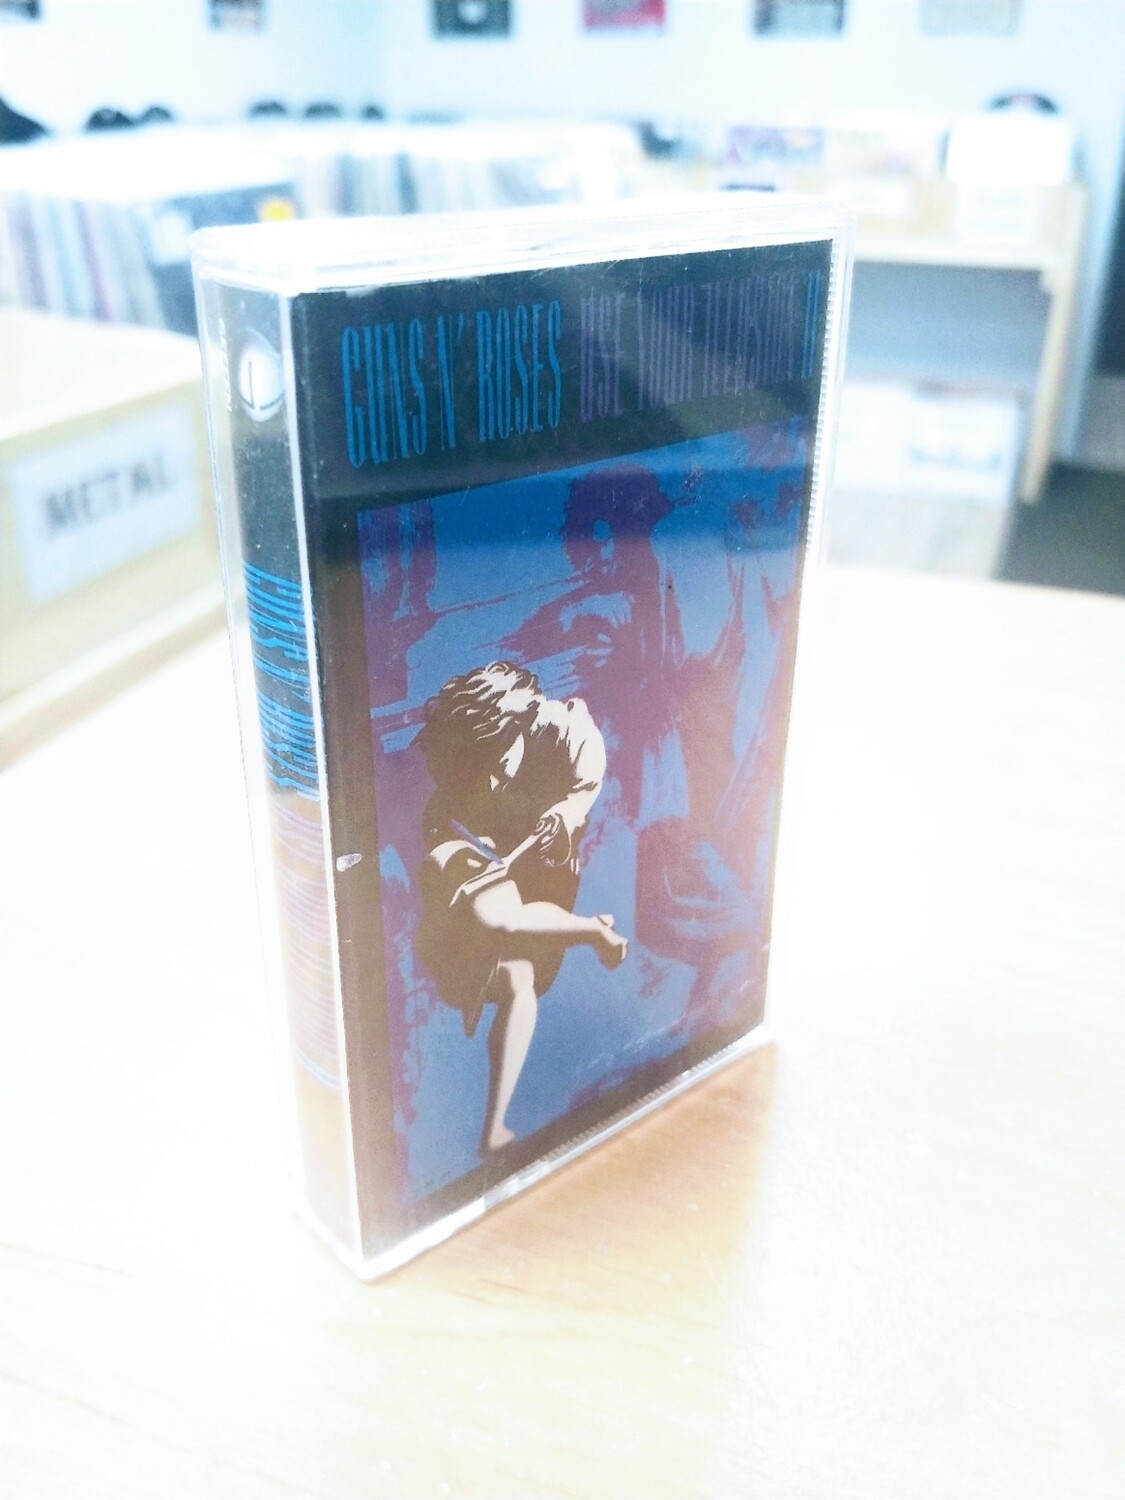 Guns N Roses - Use your illusion II (CASSETTE)